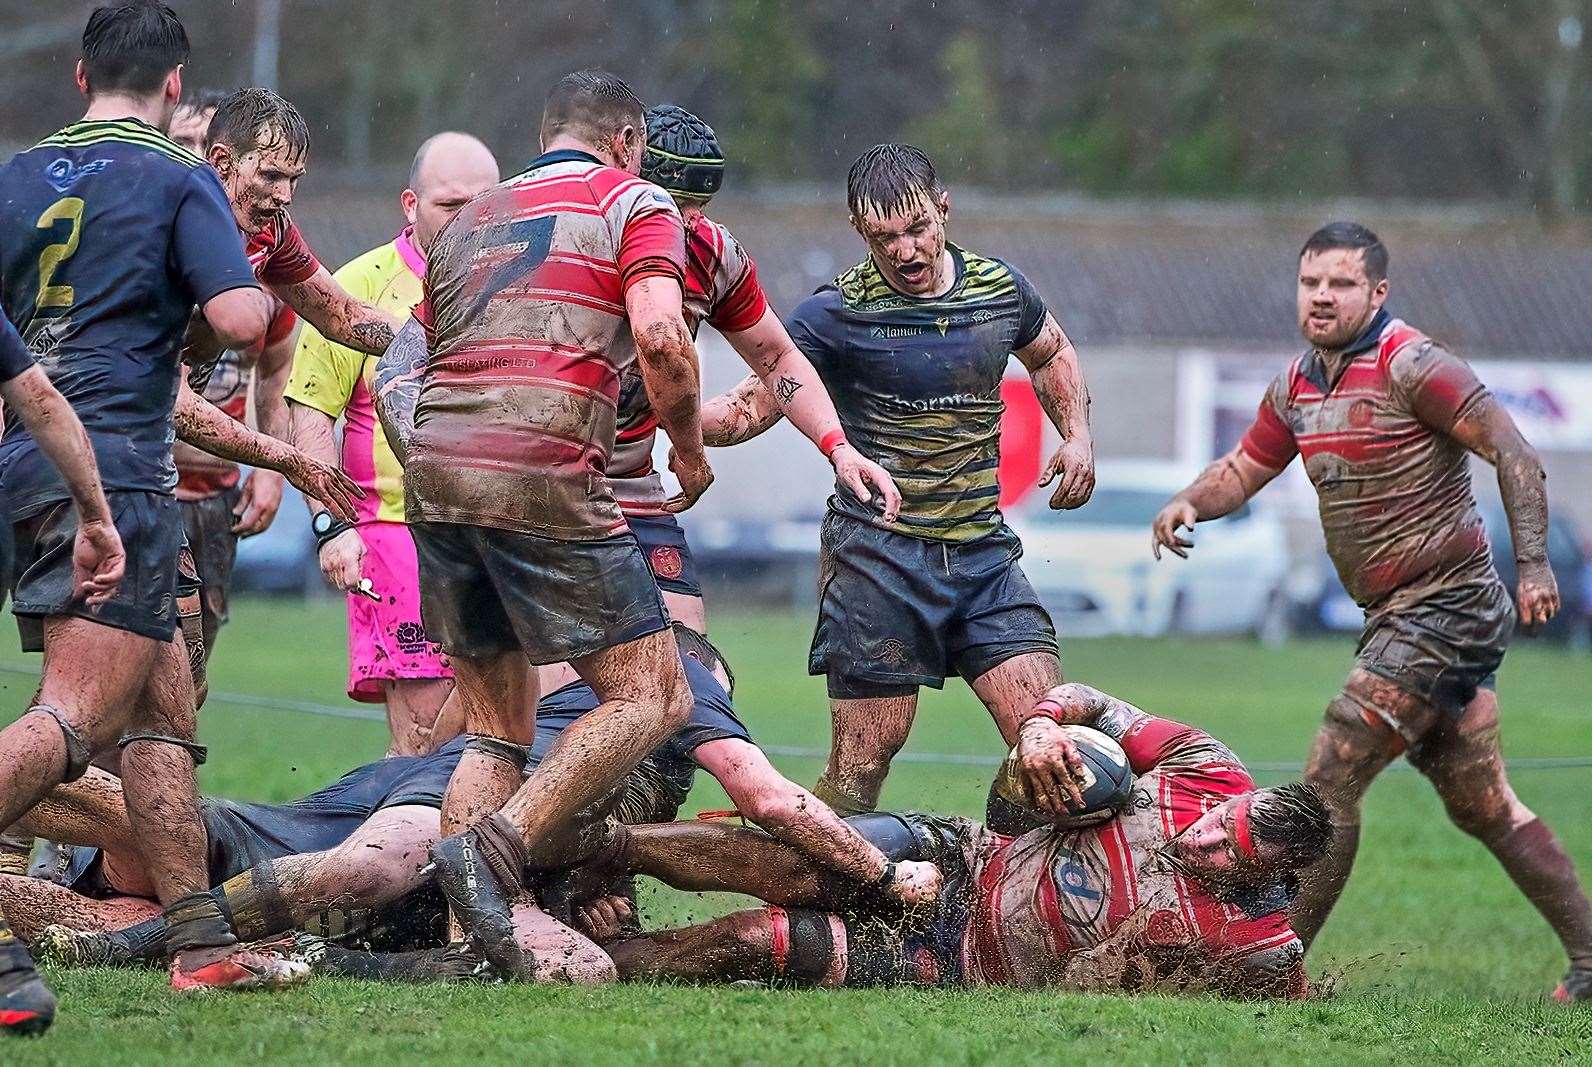 Hugh MacRae goes to ground to set the ruck. Picture: John MacGregor